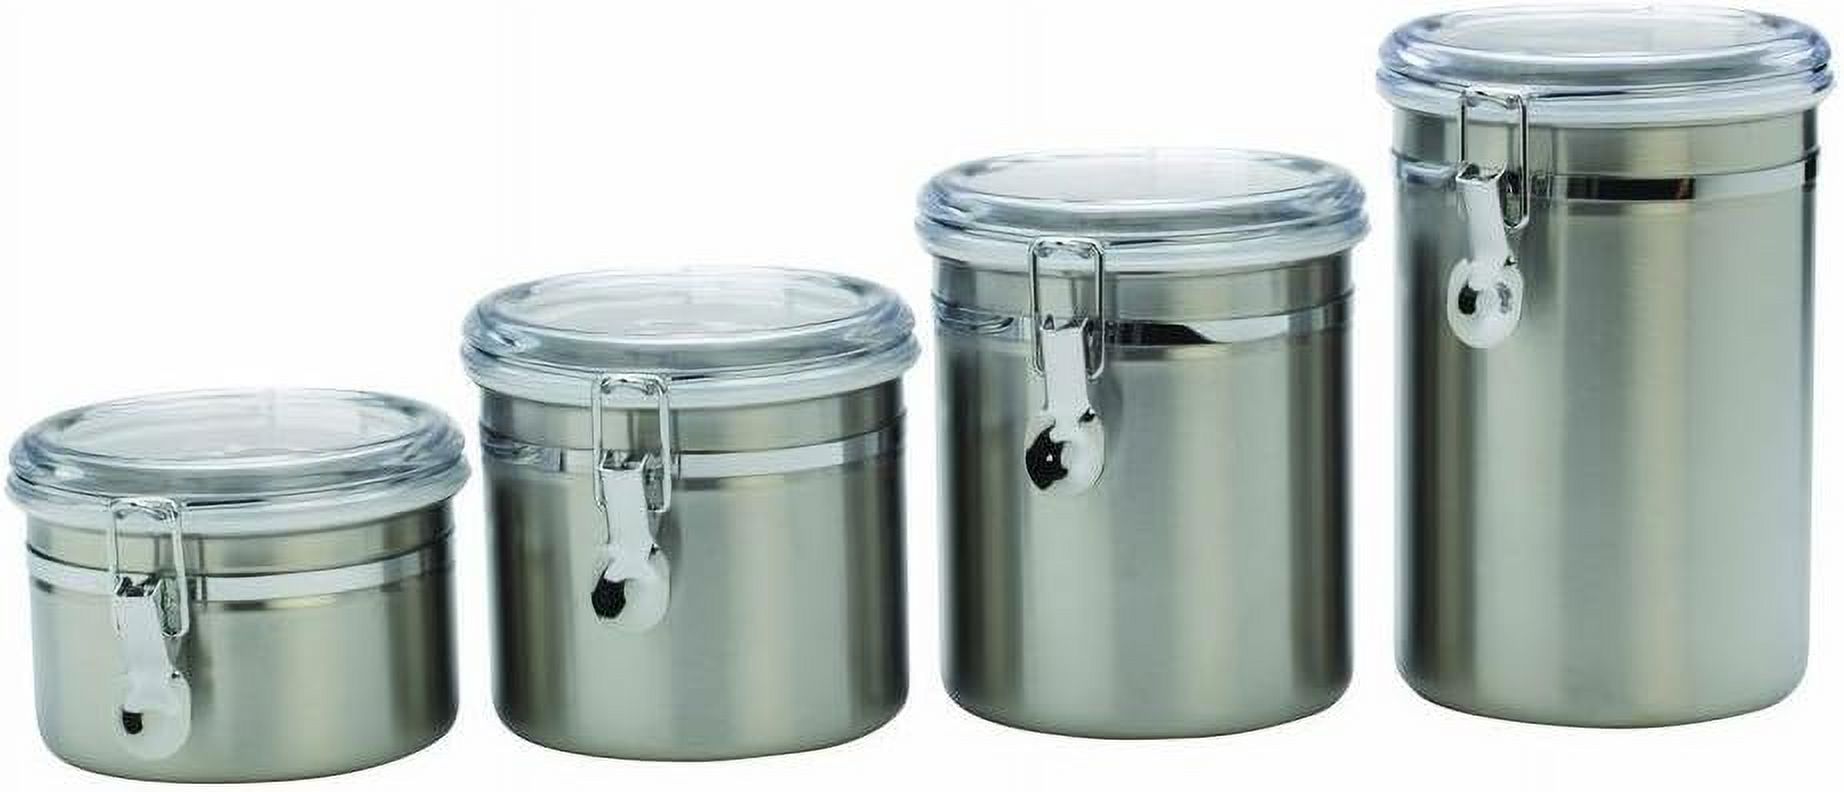 Anchor Hocking Round Stainless Steel Canister Set with Clear Acrylic Lid and Locking Clamp, 4-Piece Set - Piece Stainless Steel Canister Set - image 1 of 7